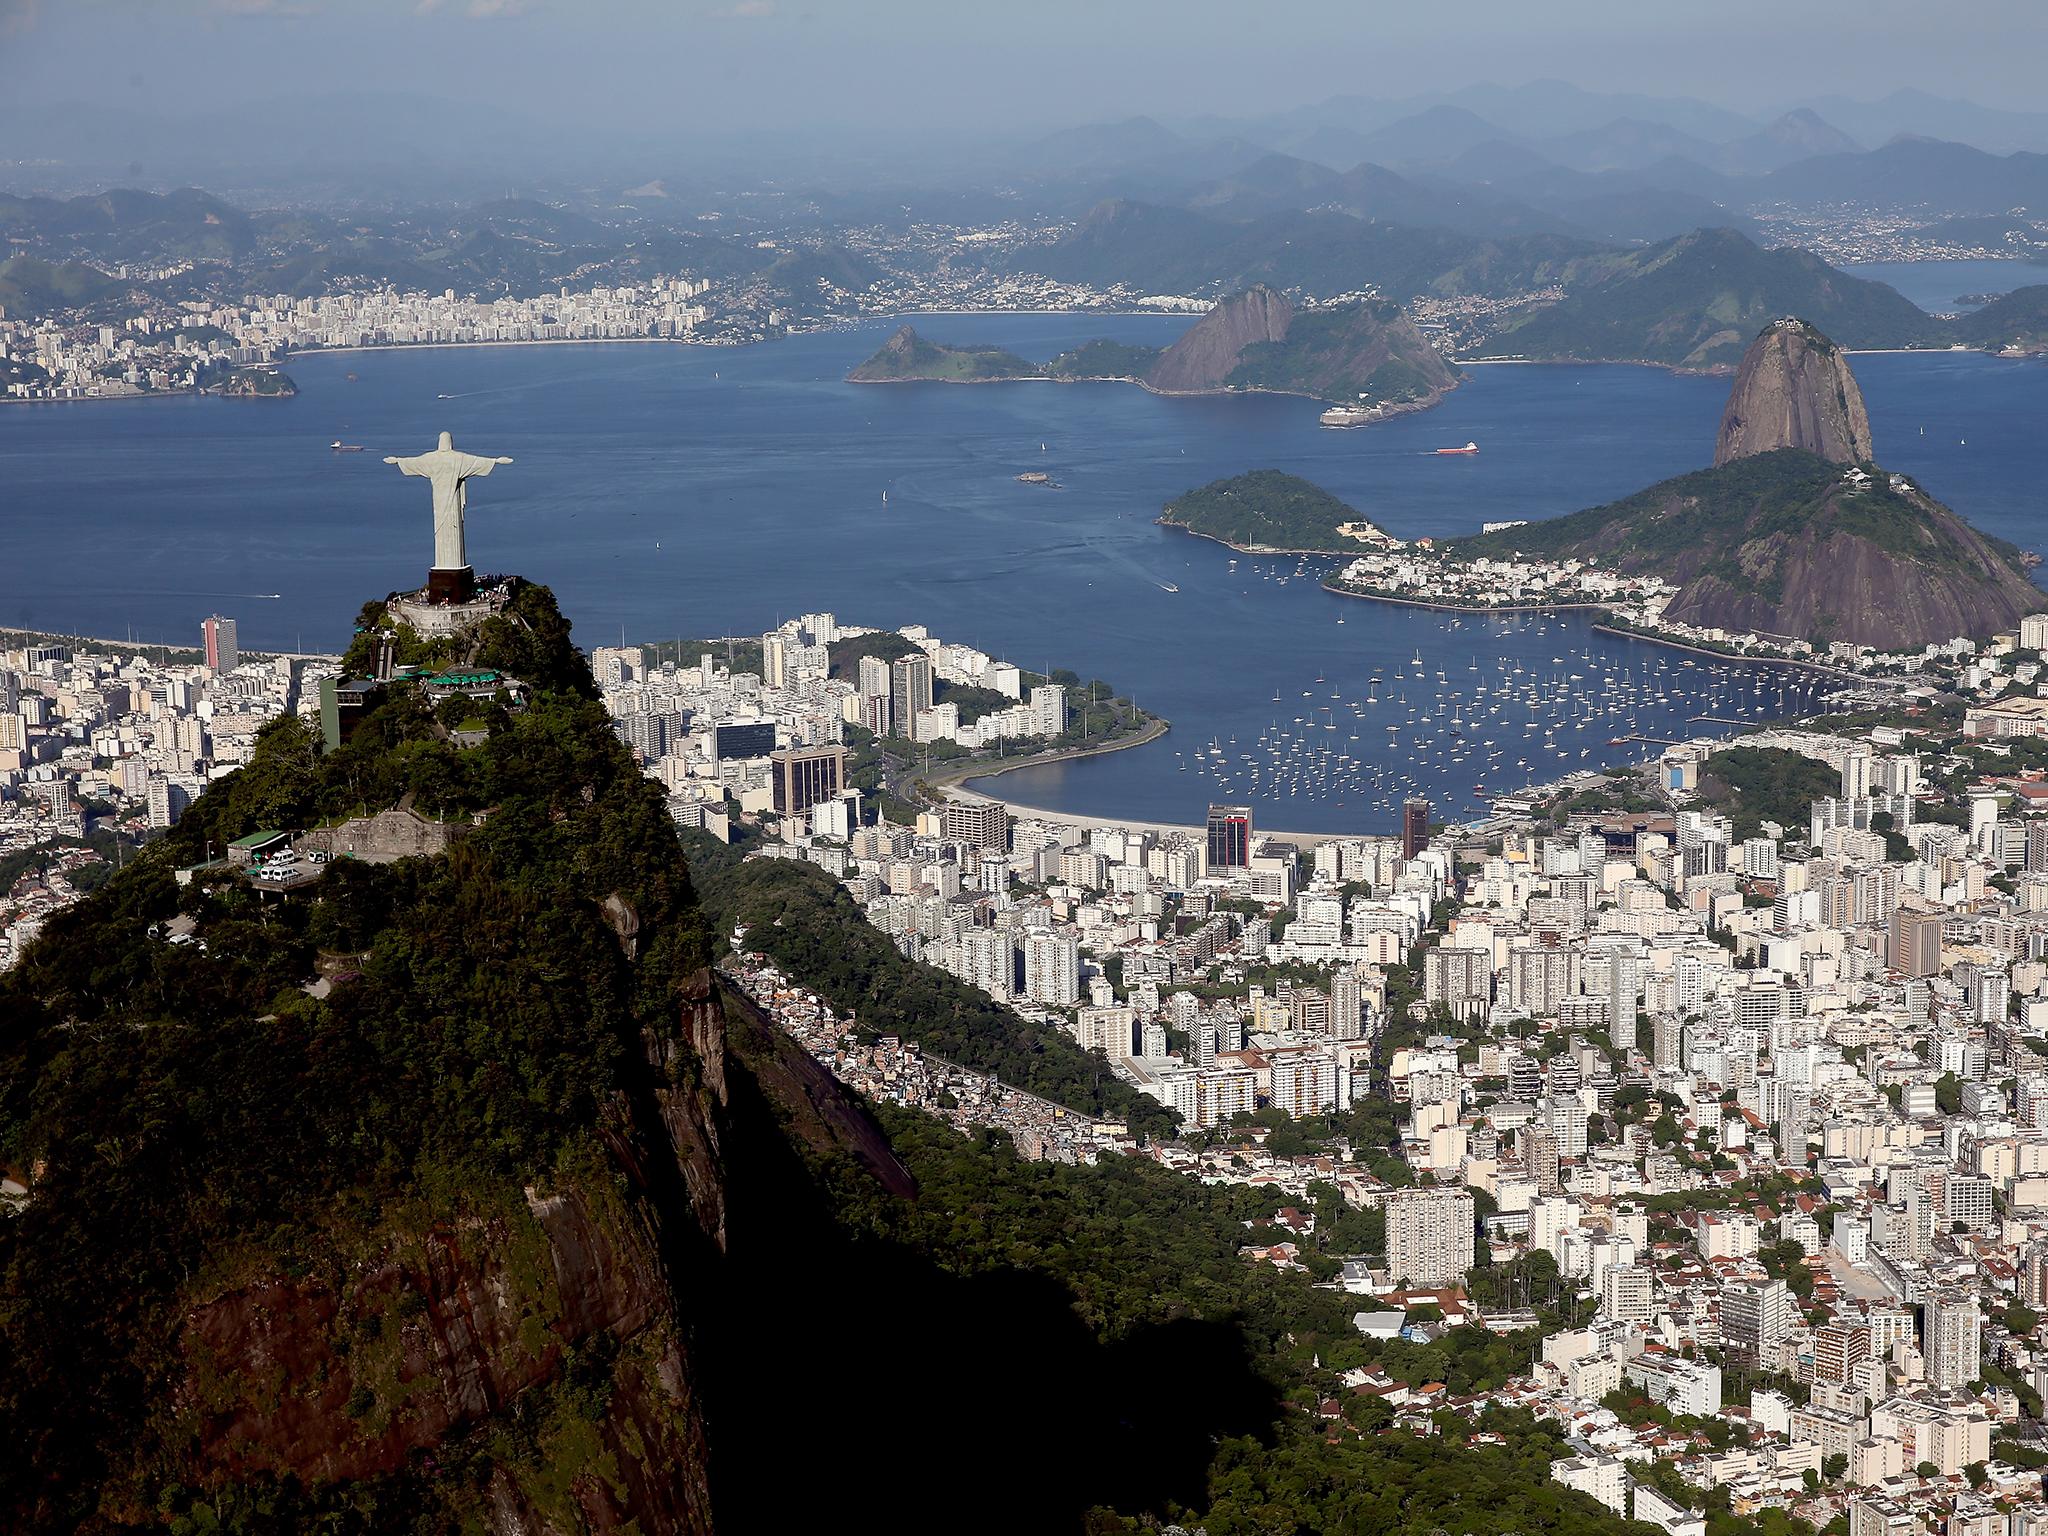 A flight to Rio from London is likely to be cheaper than from Frankfurt